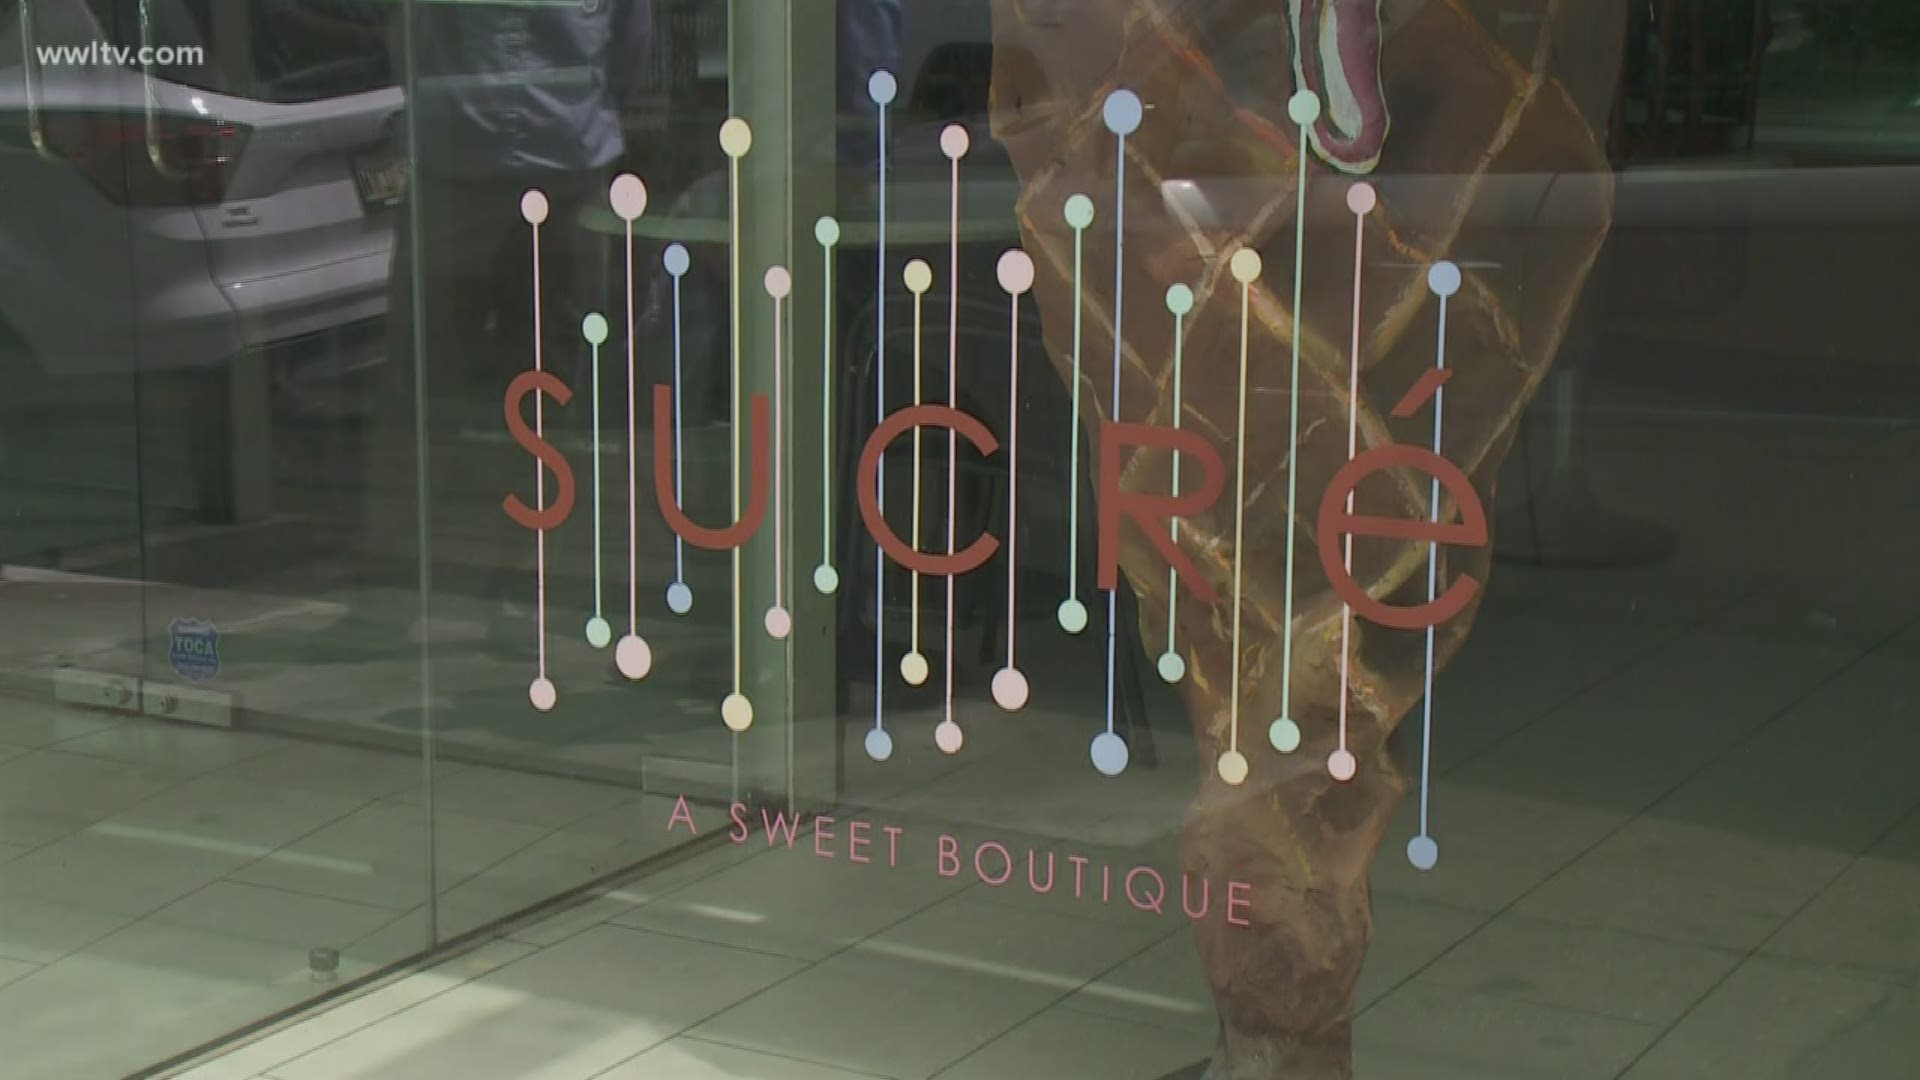 A note from the company said the closing is effective immediately. “Thank you for your patronage of Sucre during these past 13 years,” says the statement.